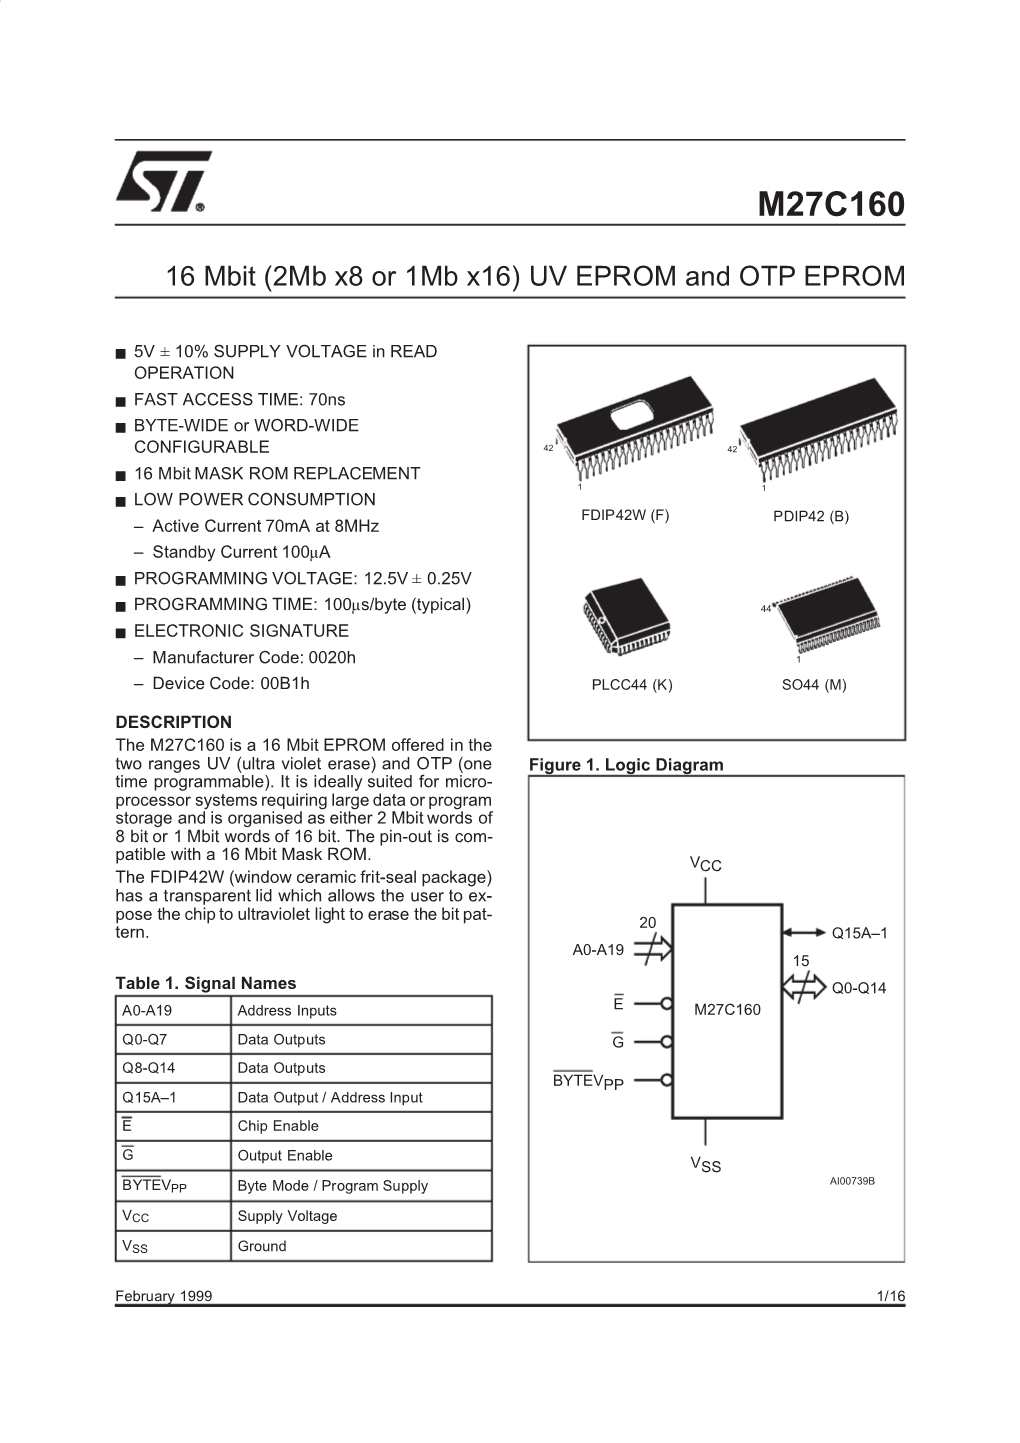 16 Mbit (2Mb X8 Or 1Mb X16) UV EPROM and OTP EPROM